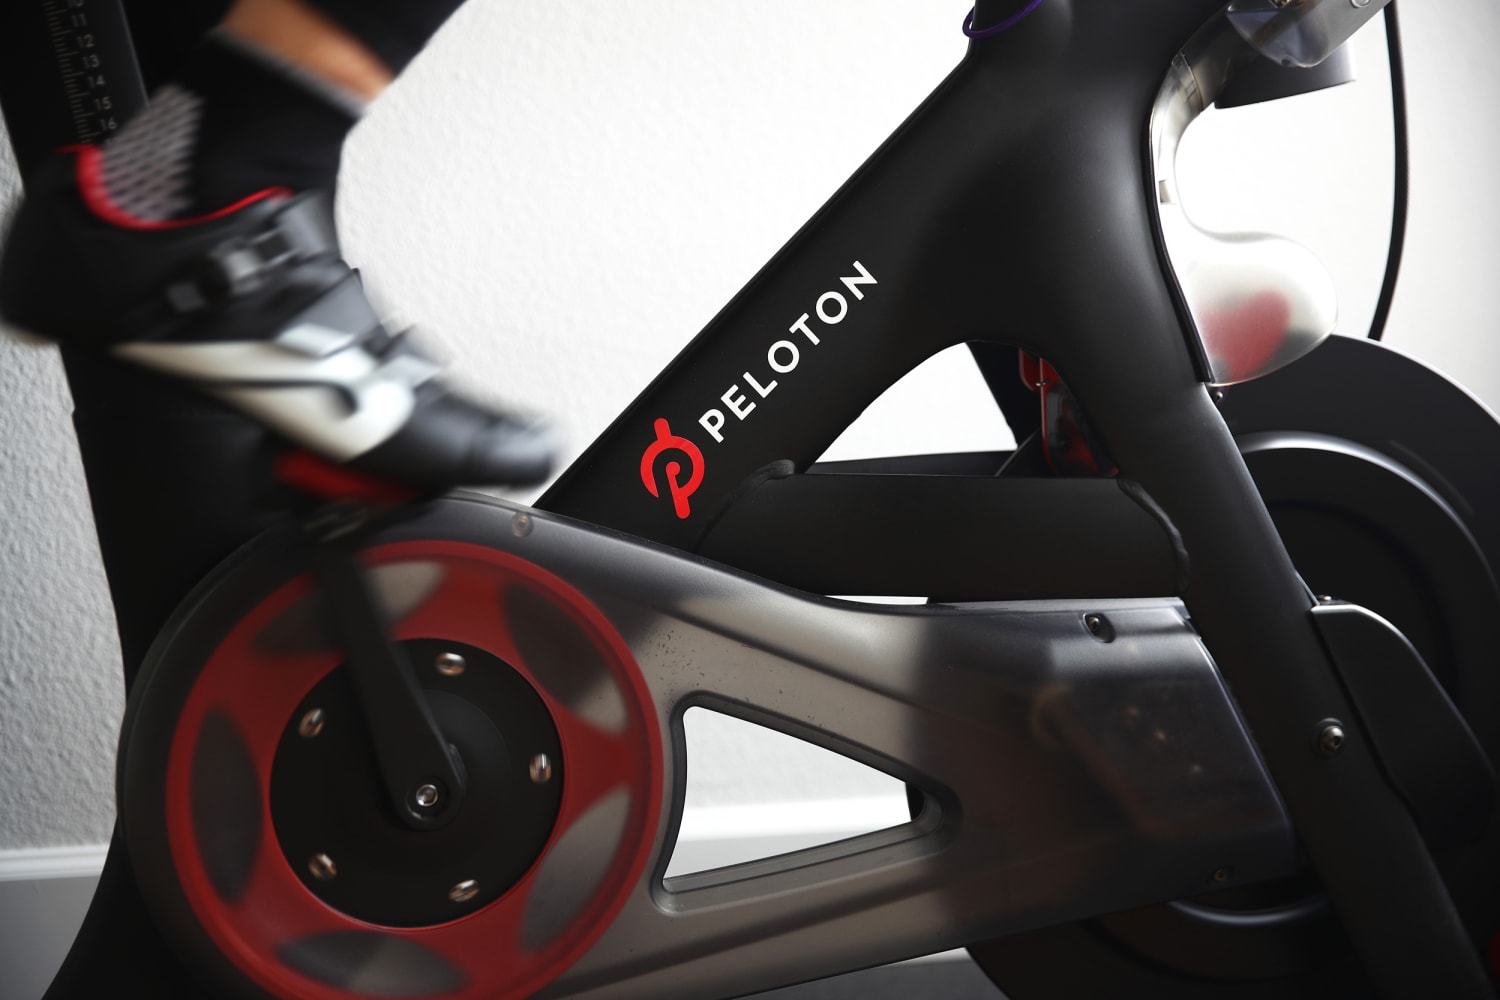 Peloton insiders sold nearly $500 million in stock before its big drop